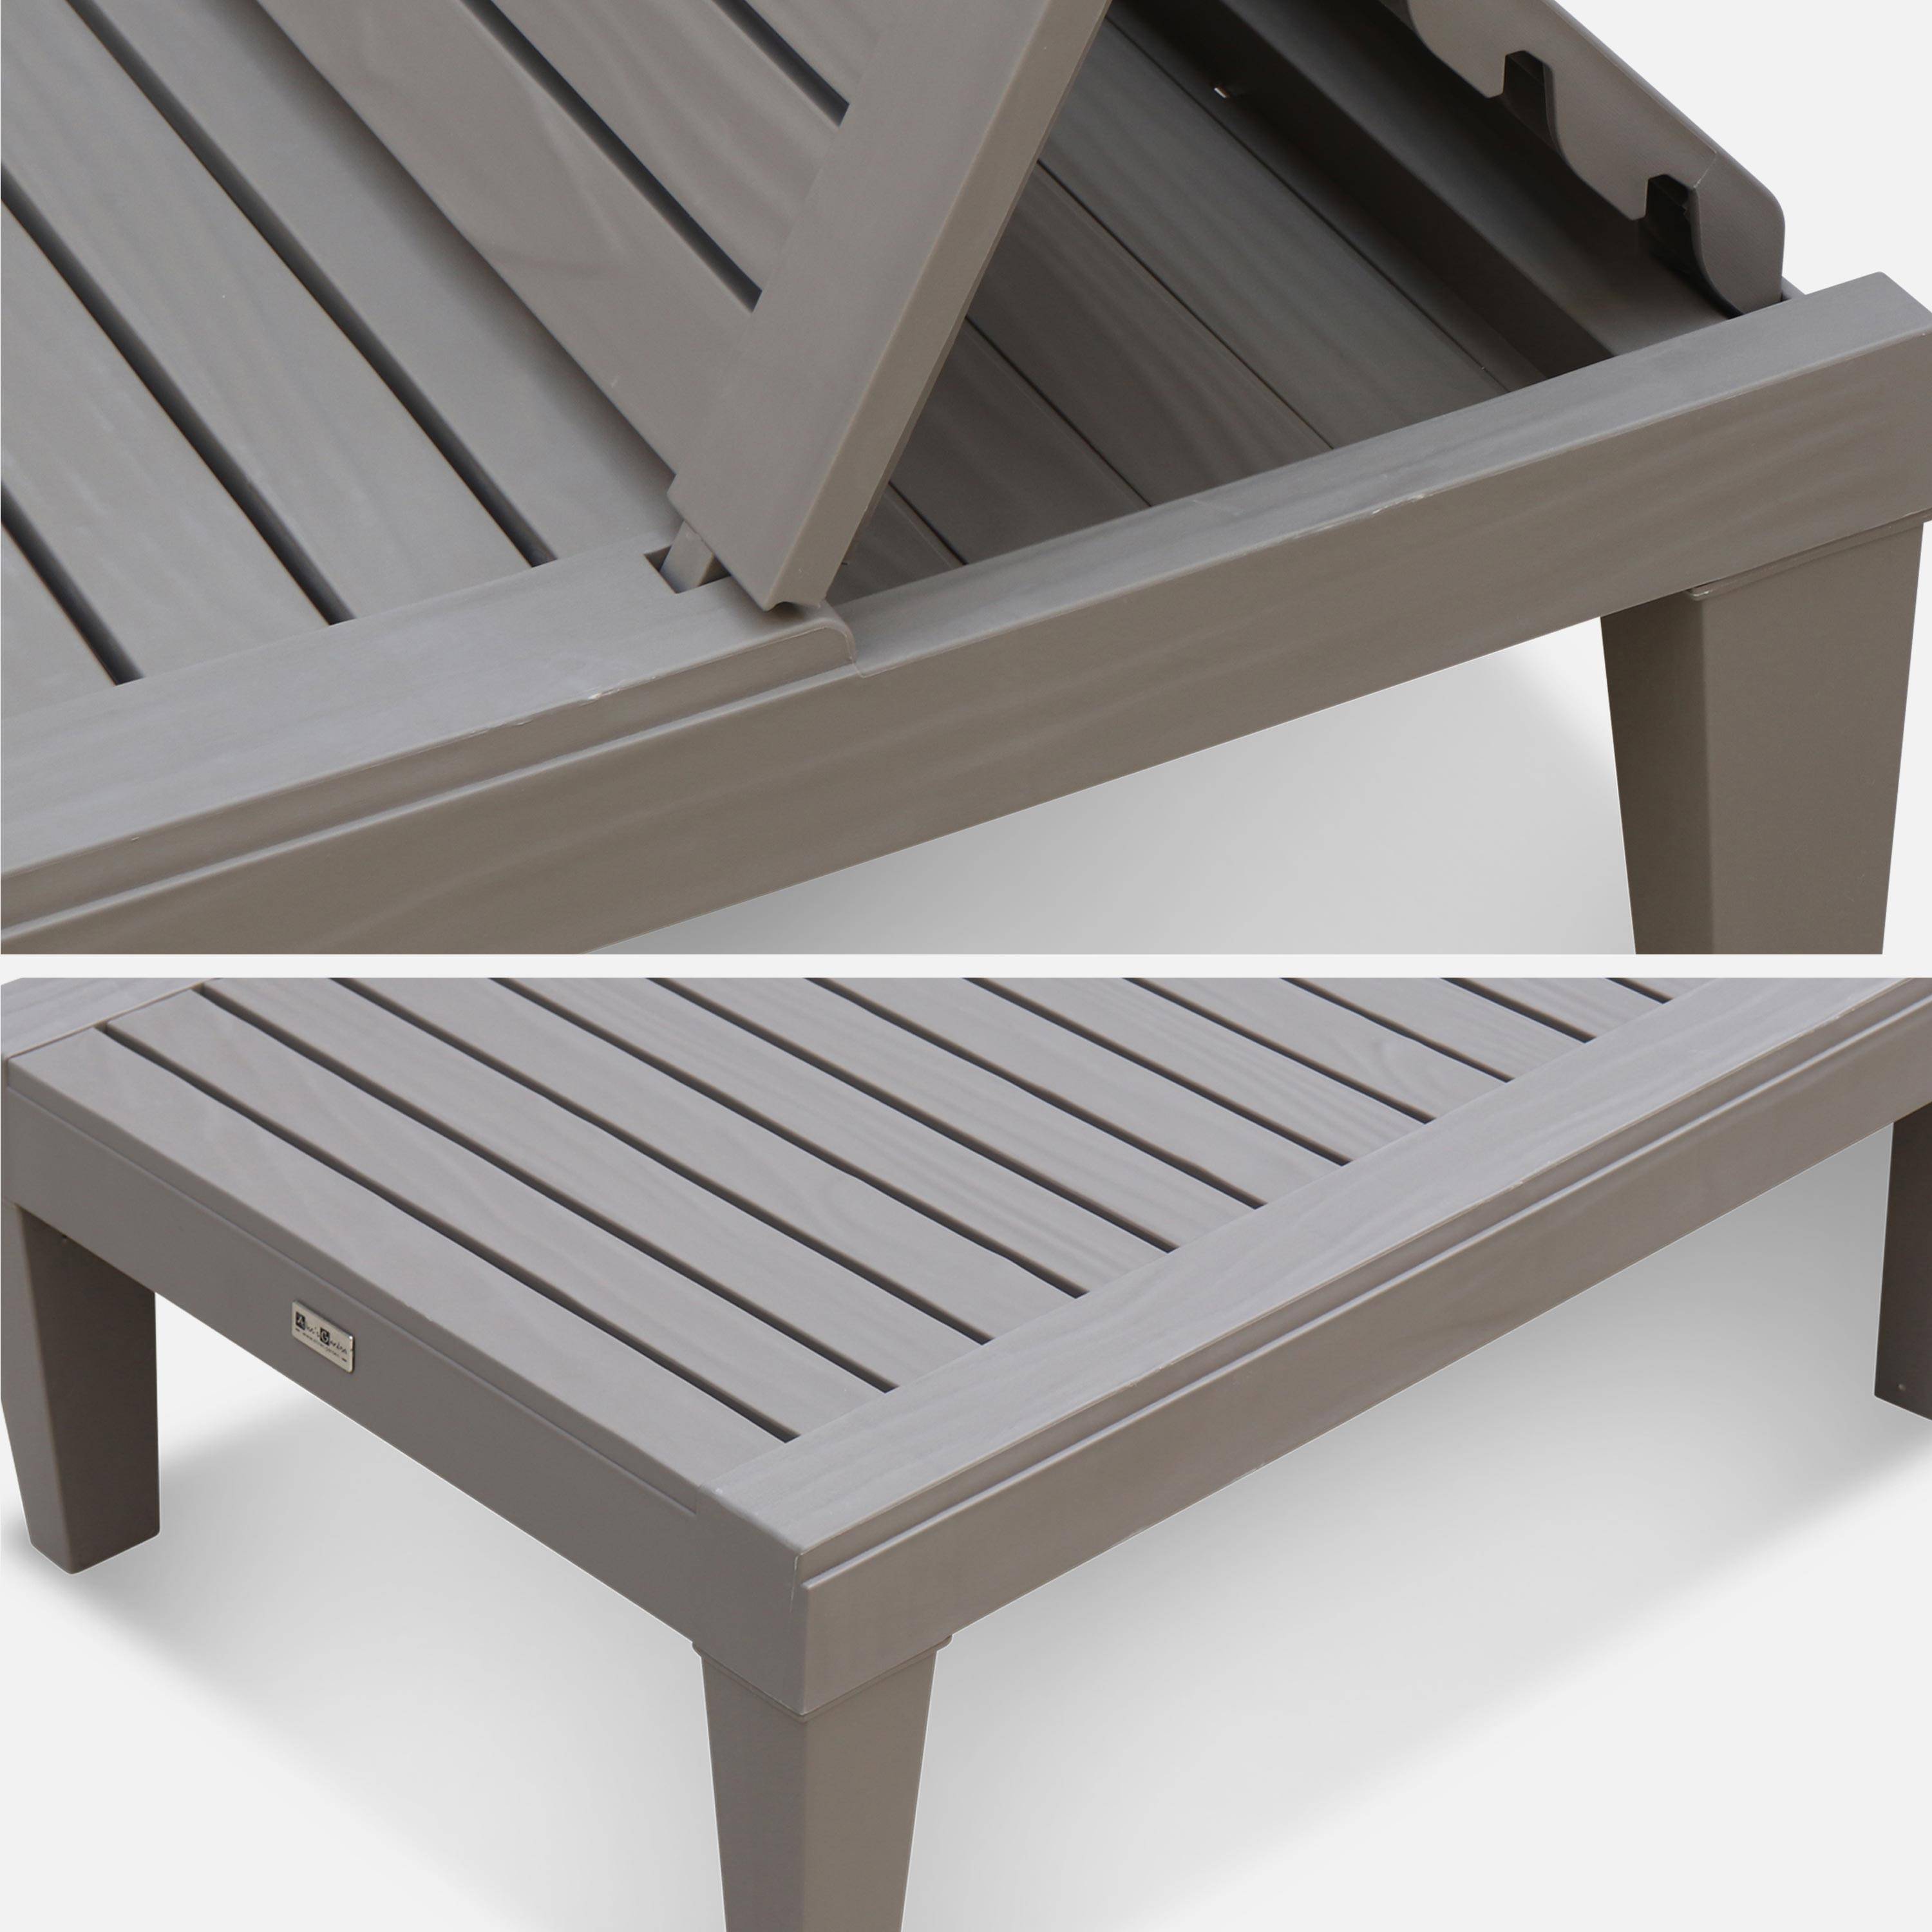 Pair of plastic loungers, multi position sun beds with textured wood effect - Pia - Grey,sweeek,Photo5